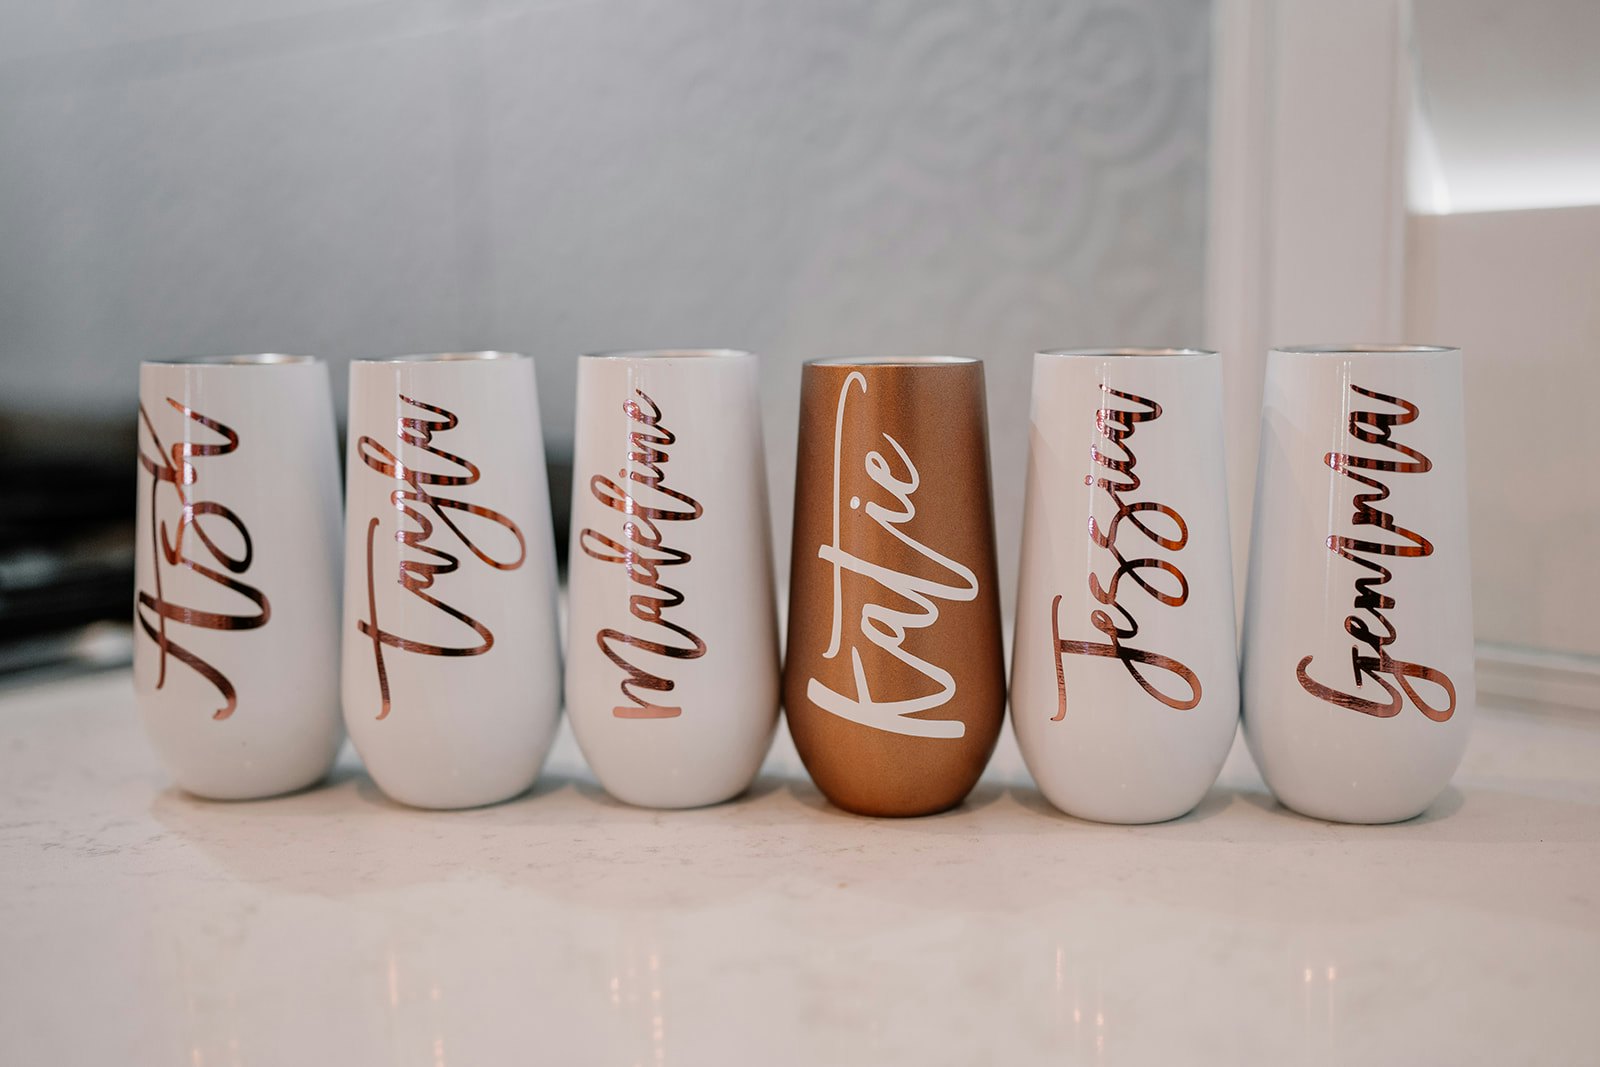 Wedding party drinking mugs with names on them